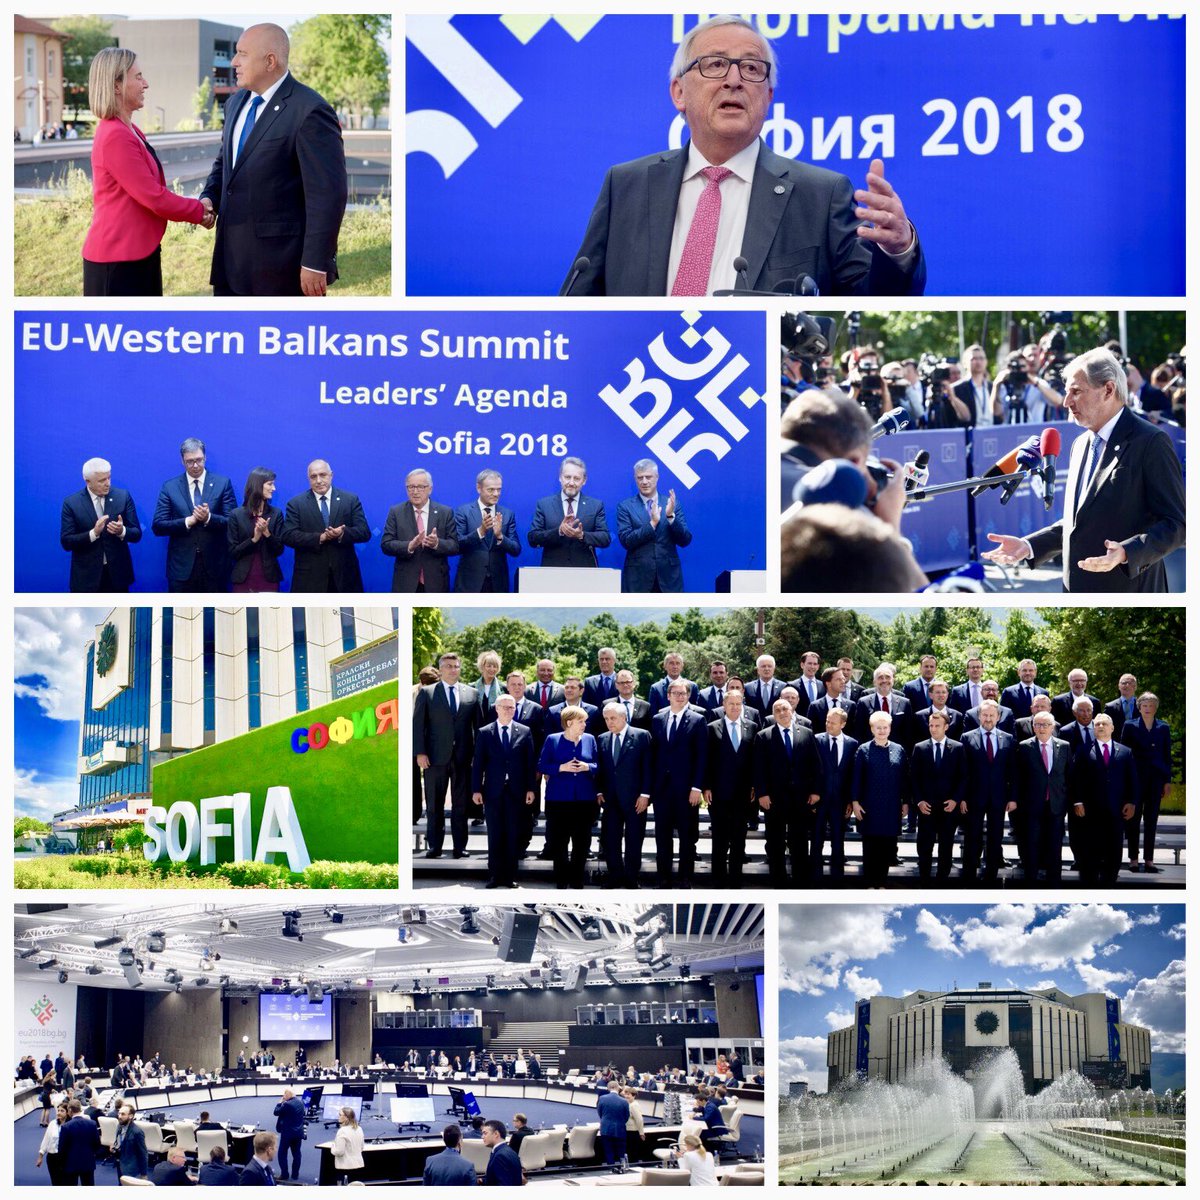 Forging ever closer ties! This week's #EUWesternBalkans Summit was a big milestone in the #EU's relations with #WesternBalkans partners. It set out concrete actions to connect #people, #infrastructures & #economies & strengthened cooperation on #security👉 europa.eu/!dn83JB